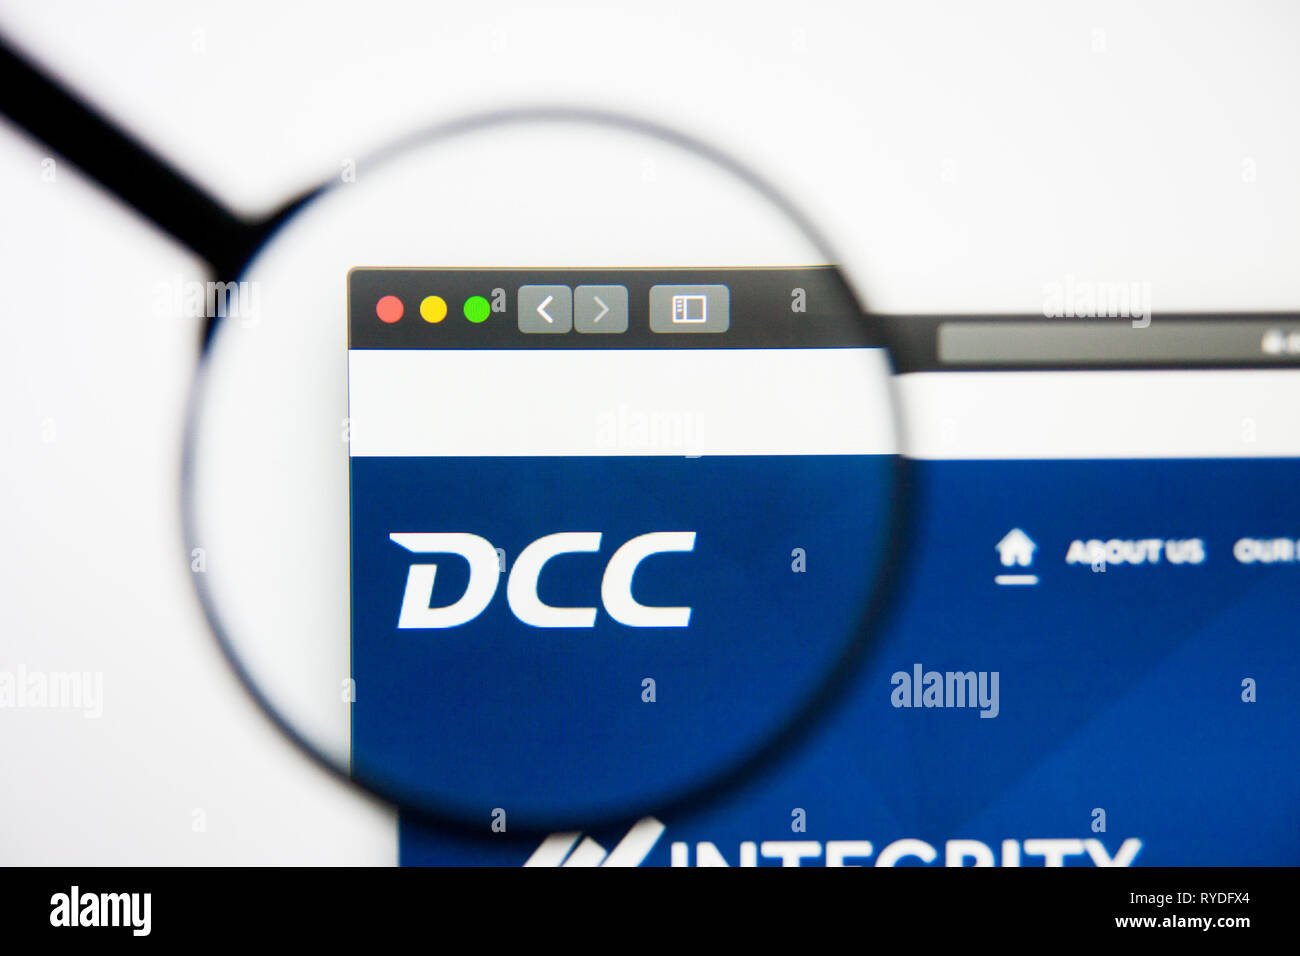 Los Angeles, California, USA - 5 March 2019: DCC website homepage. DCC logo visible on display screen, Illustrative Editorial Stock Photo